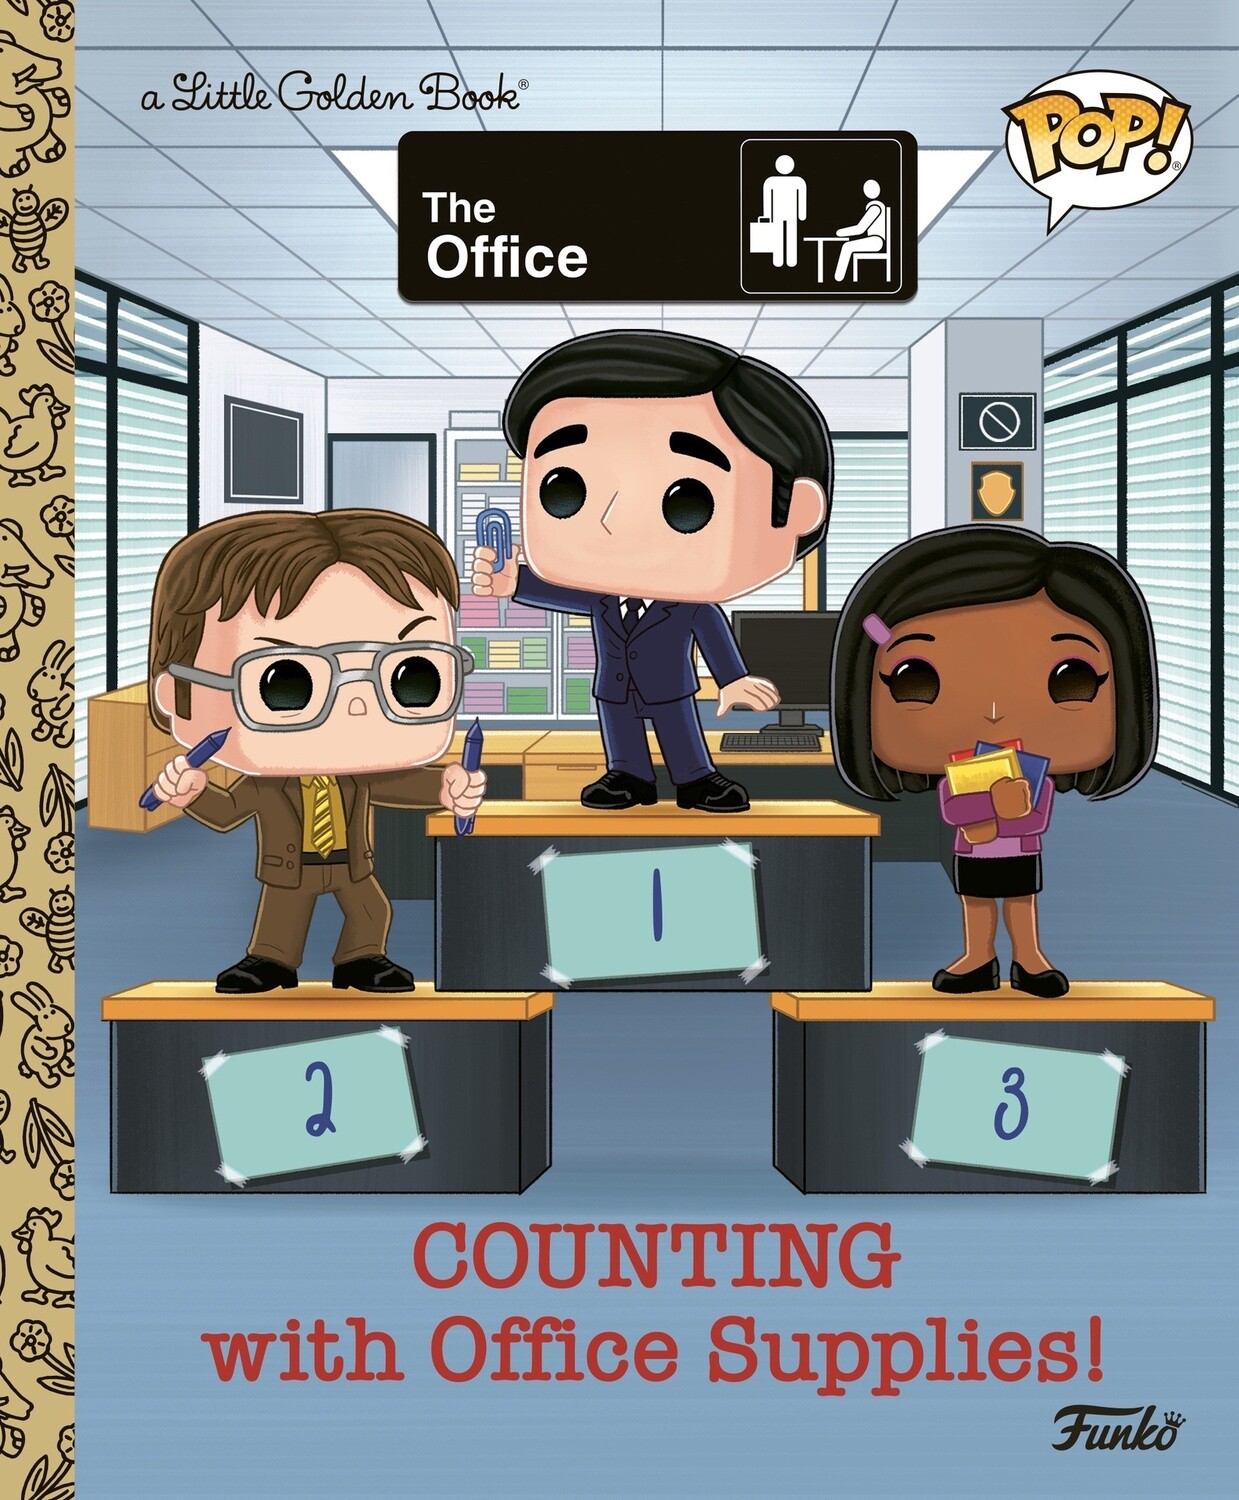 The Office Counting with Office Supplies